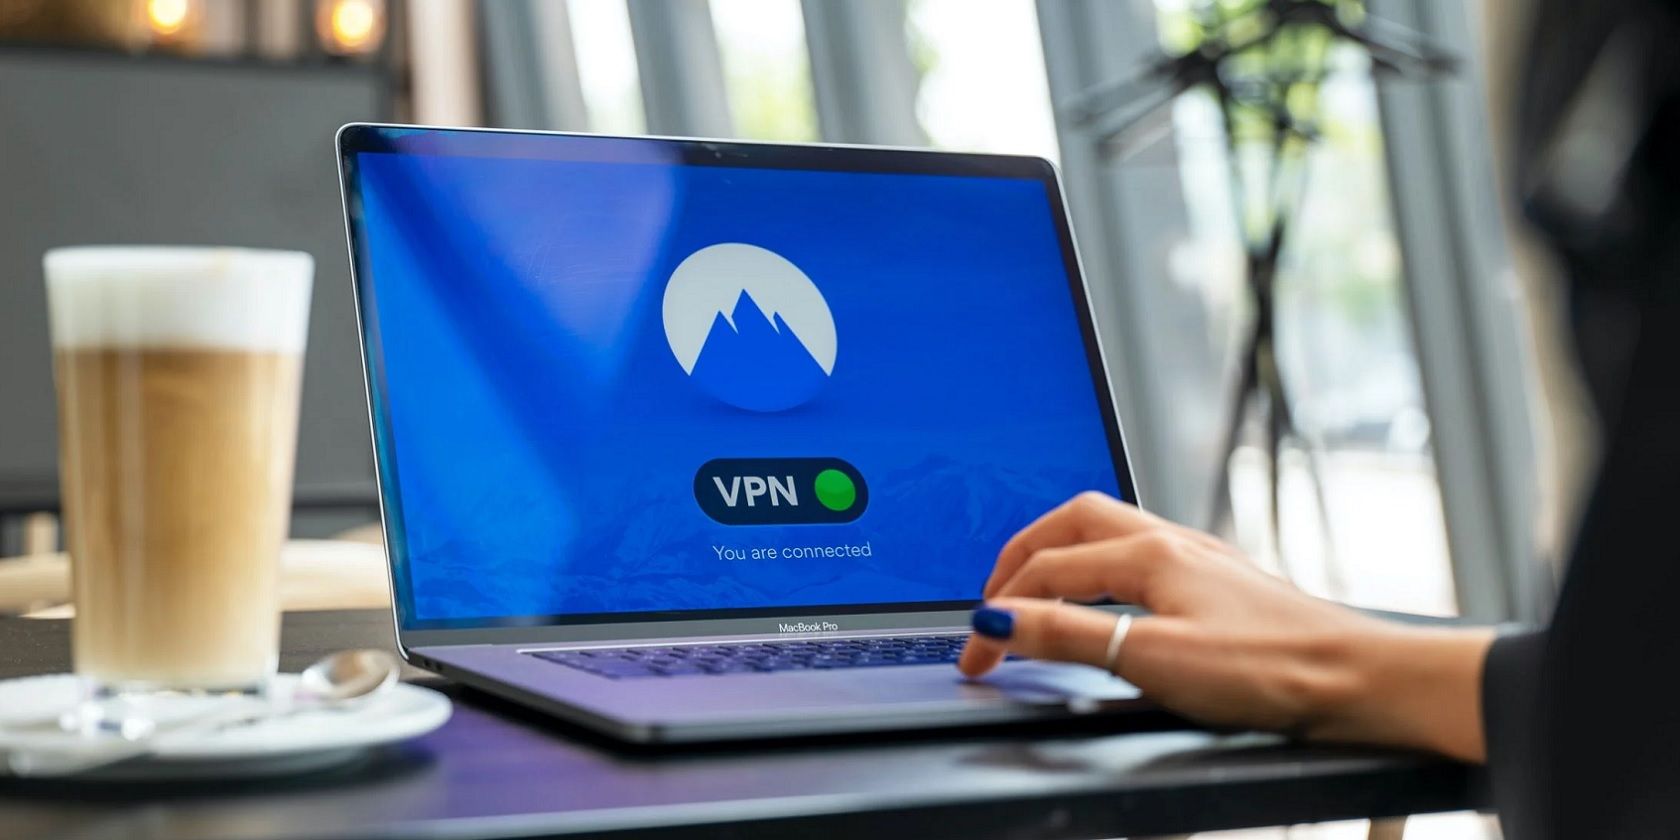 Laptop with VPN on a table